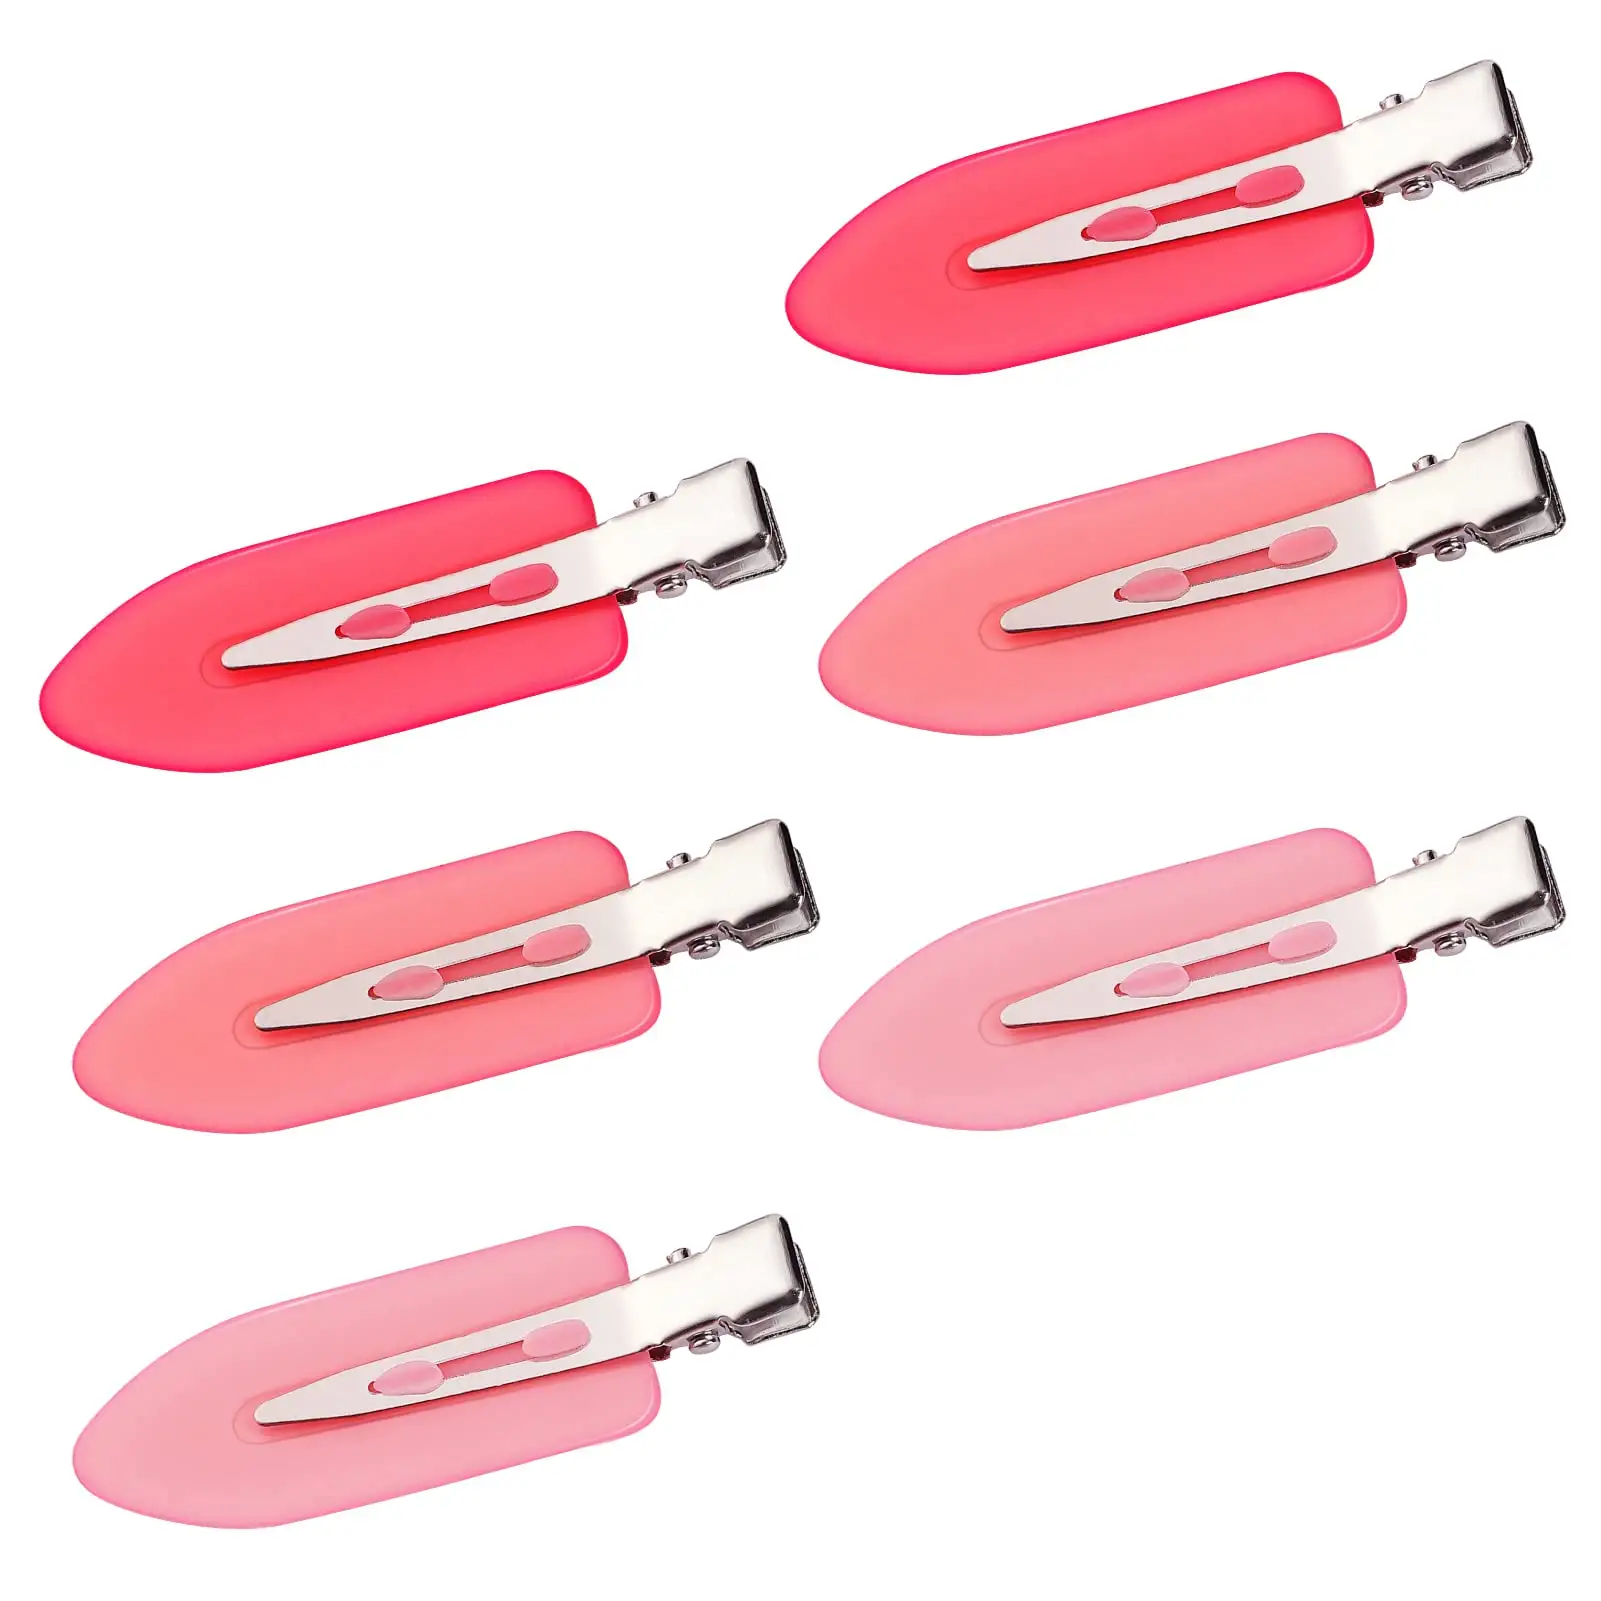 24 Colors No bend No Crease Hair Clips Styling Duck Bill Clips No Dent Alligator Hair Barrettes for Salon Hairstyle Hairdressing